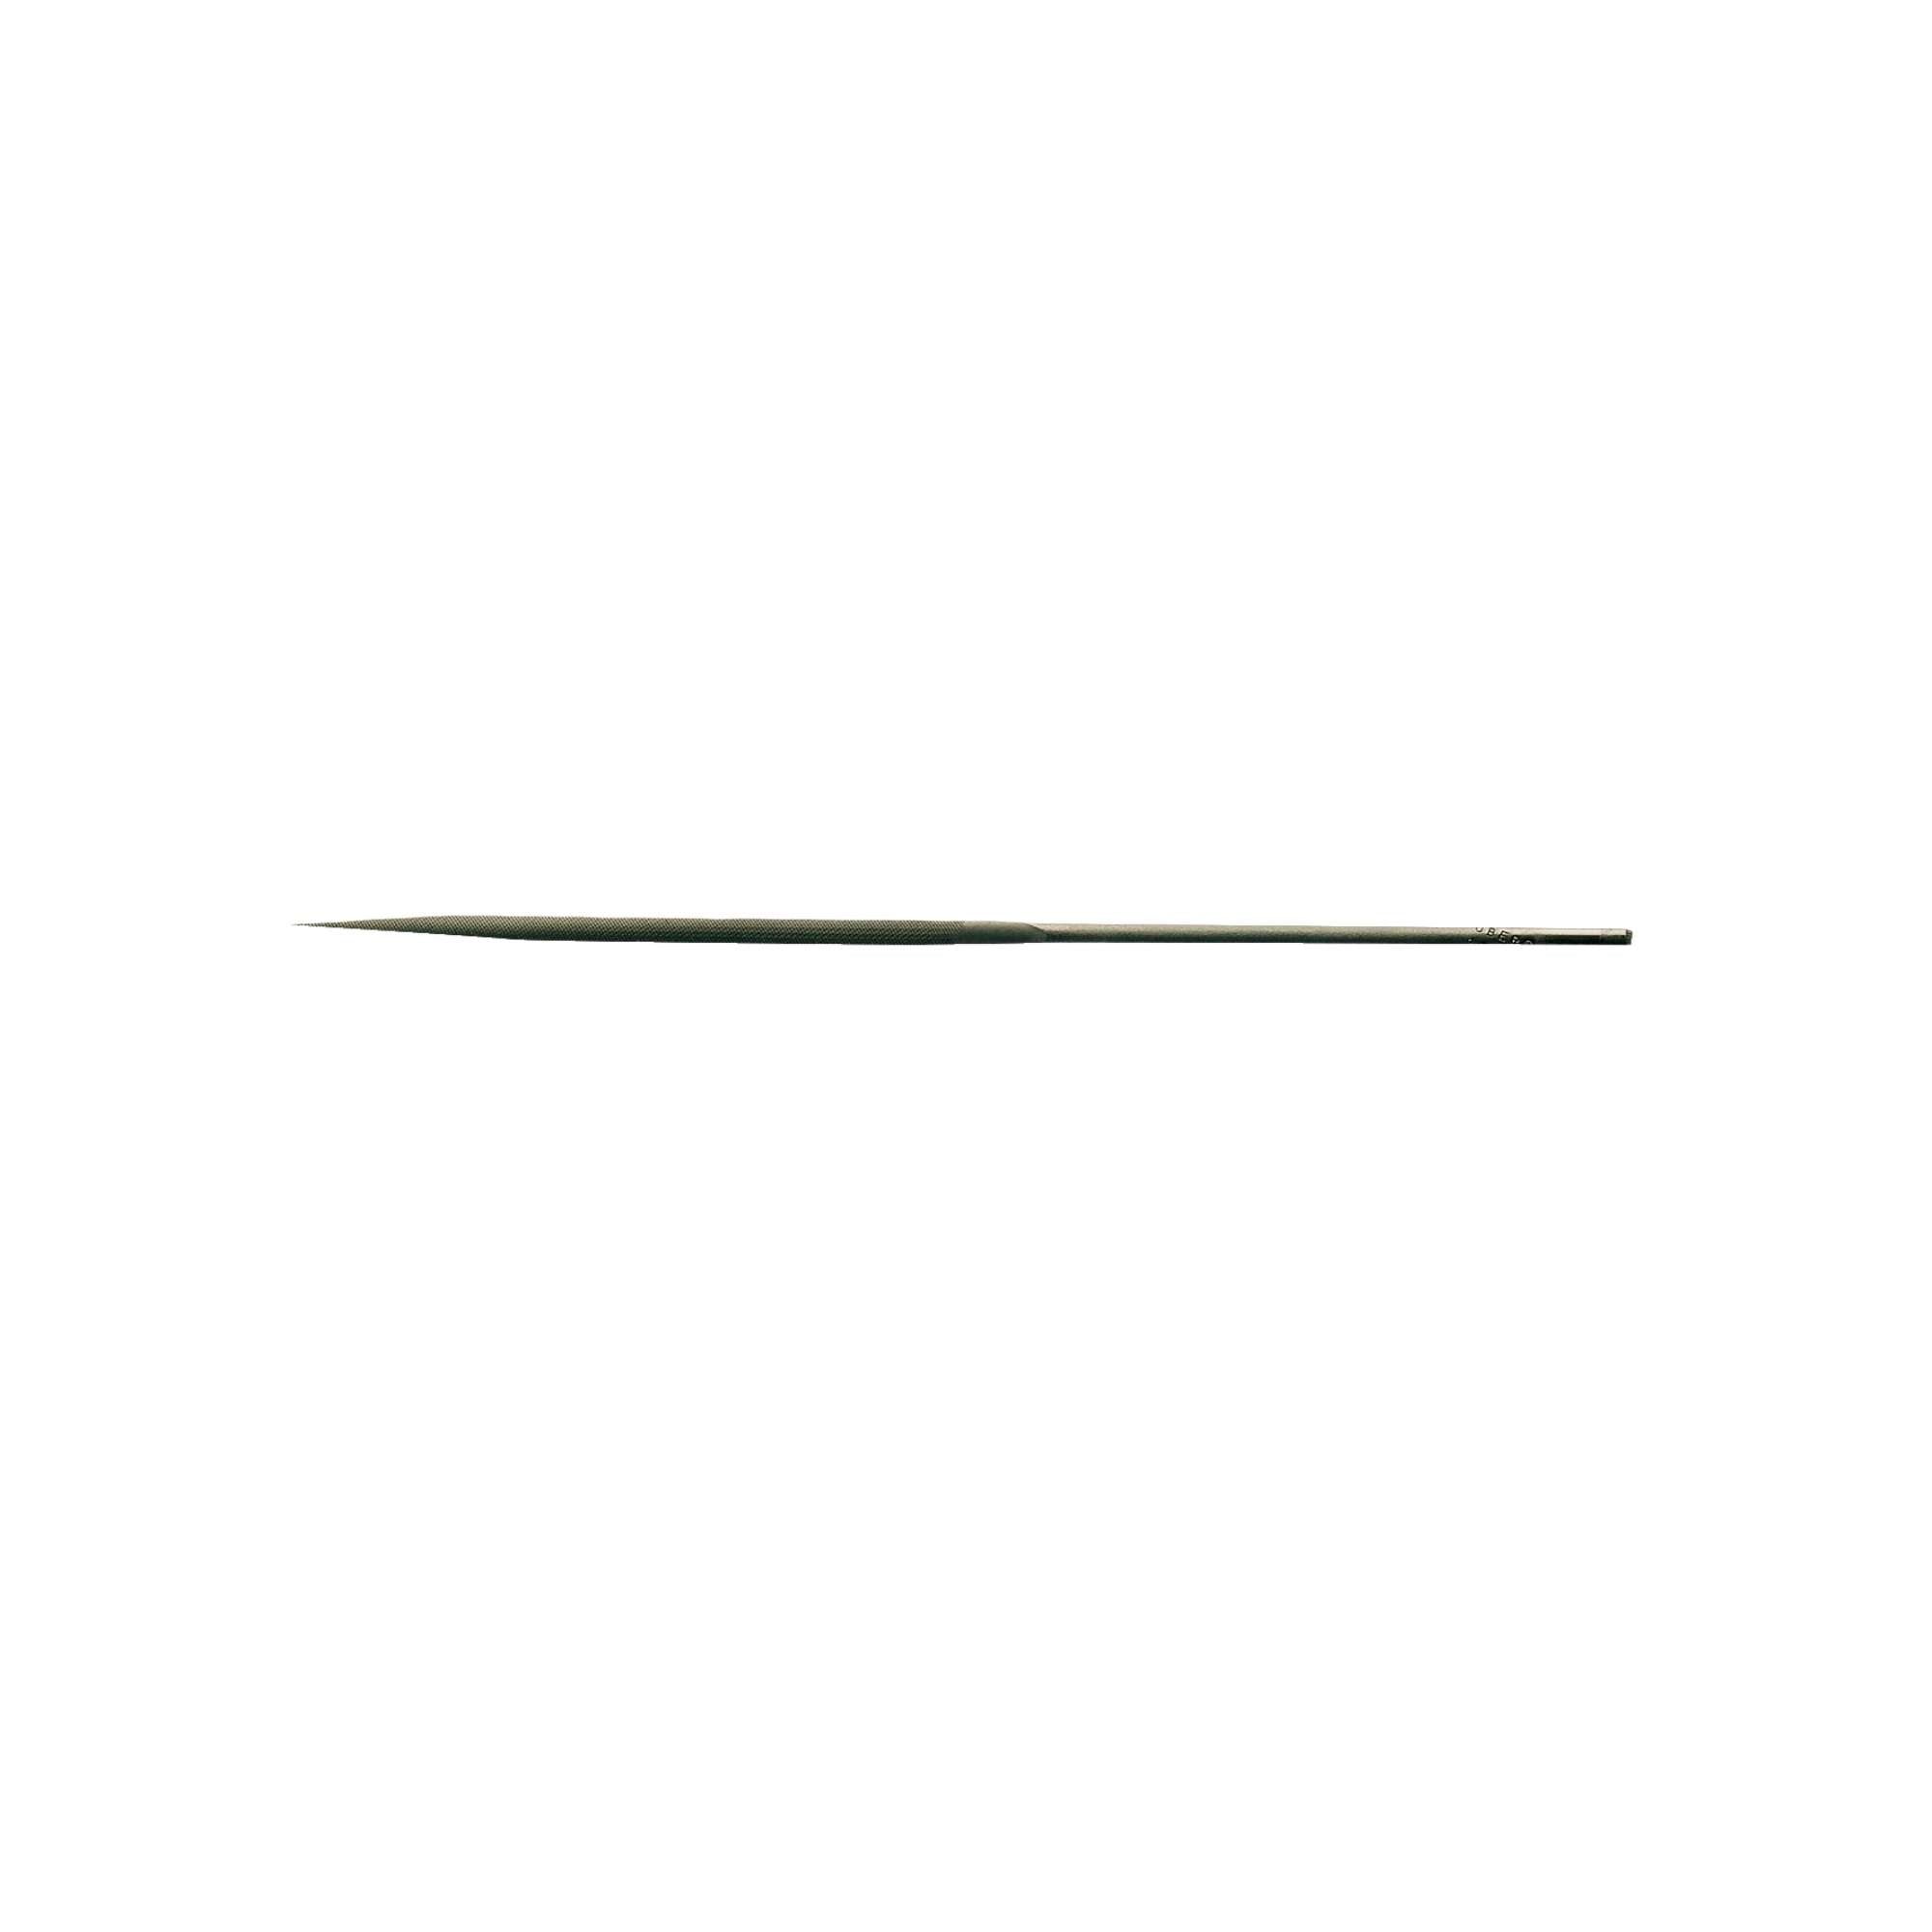 Oval Needle File Smooth Cut for Finishing - Bahco 2-305-16-2-0